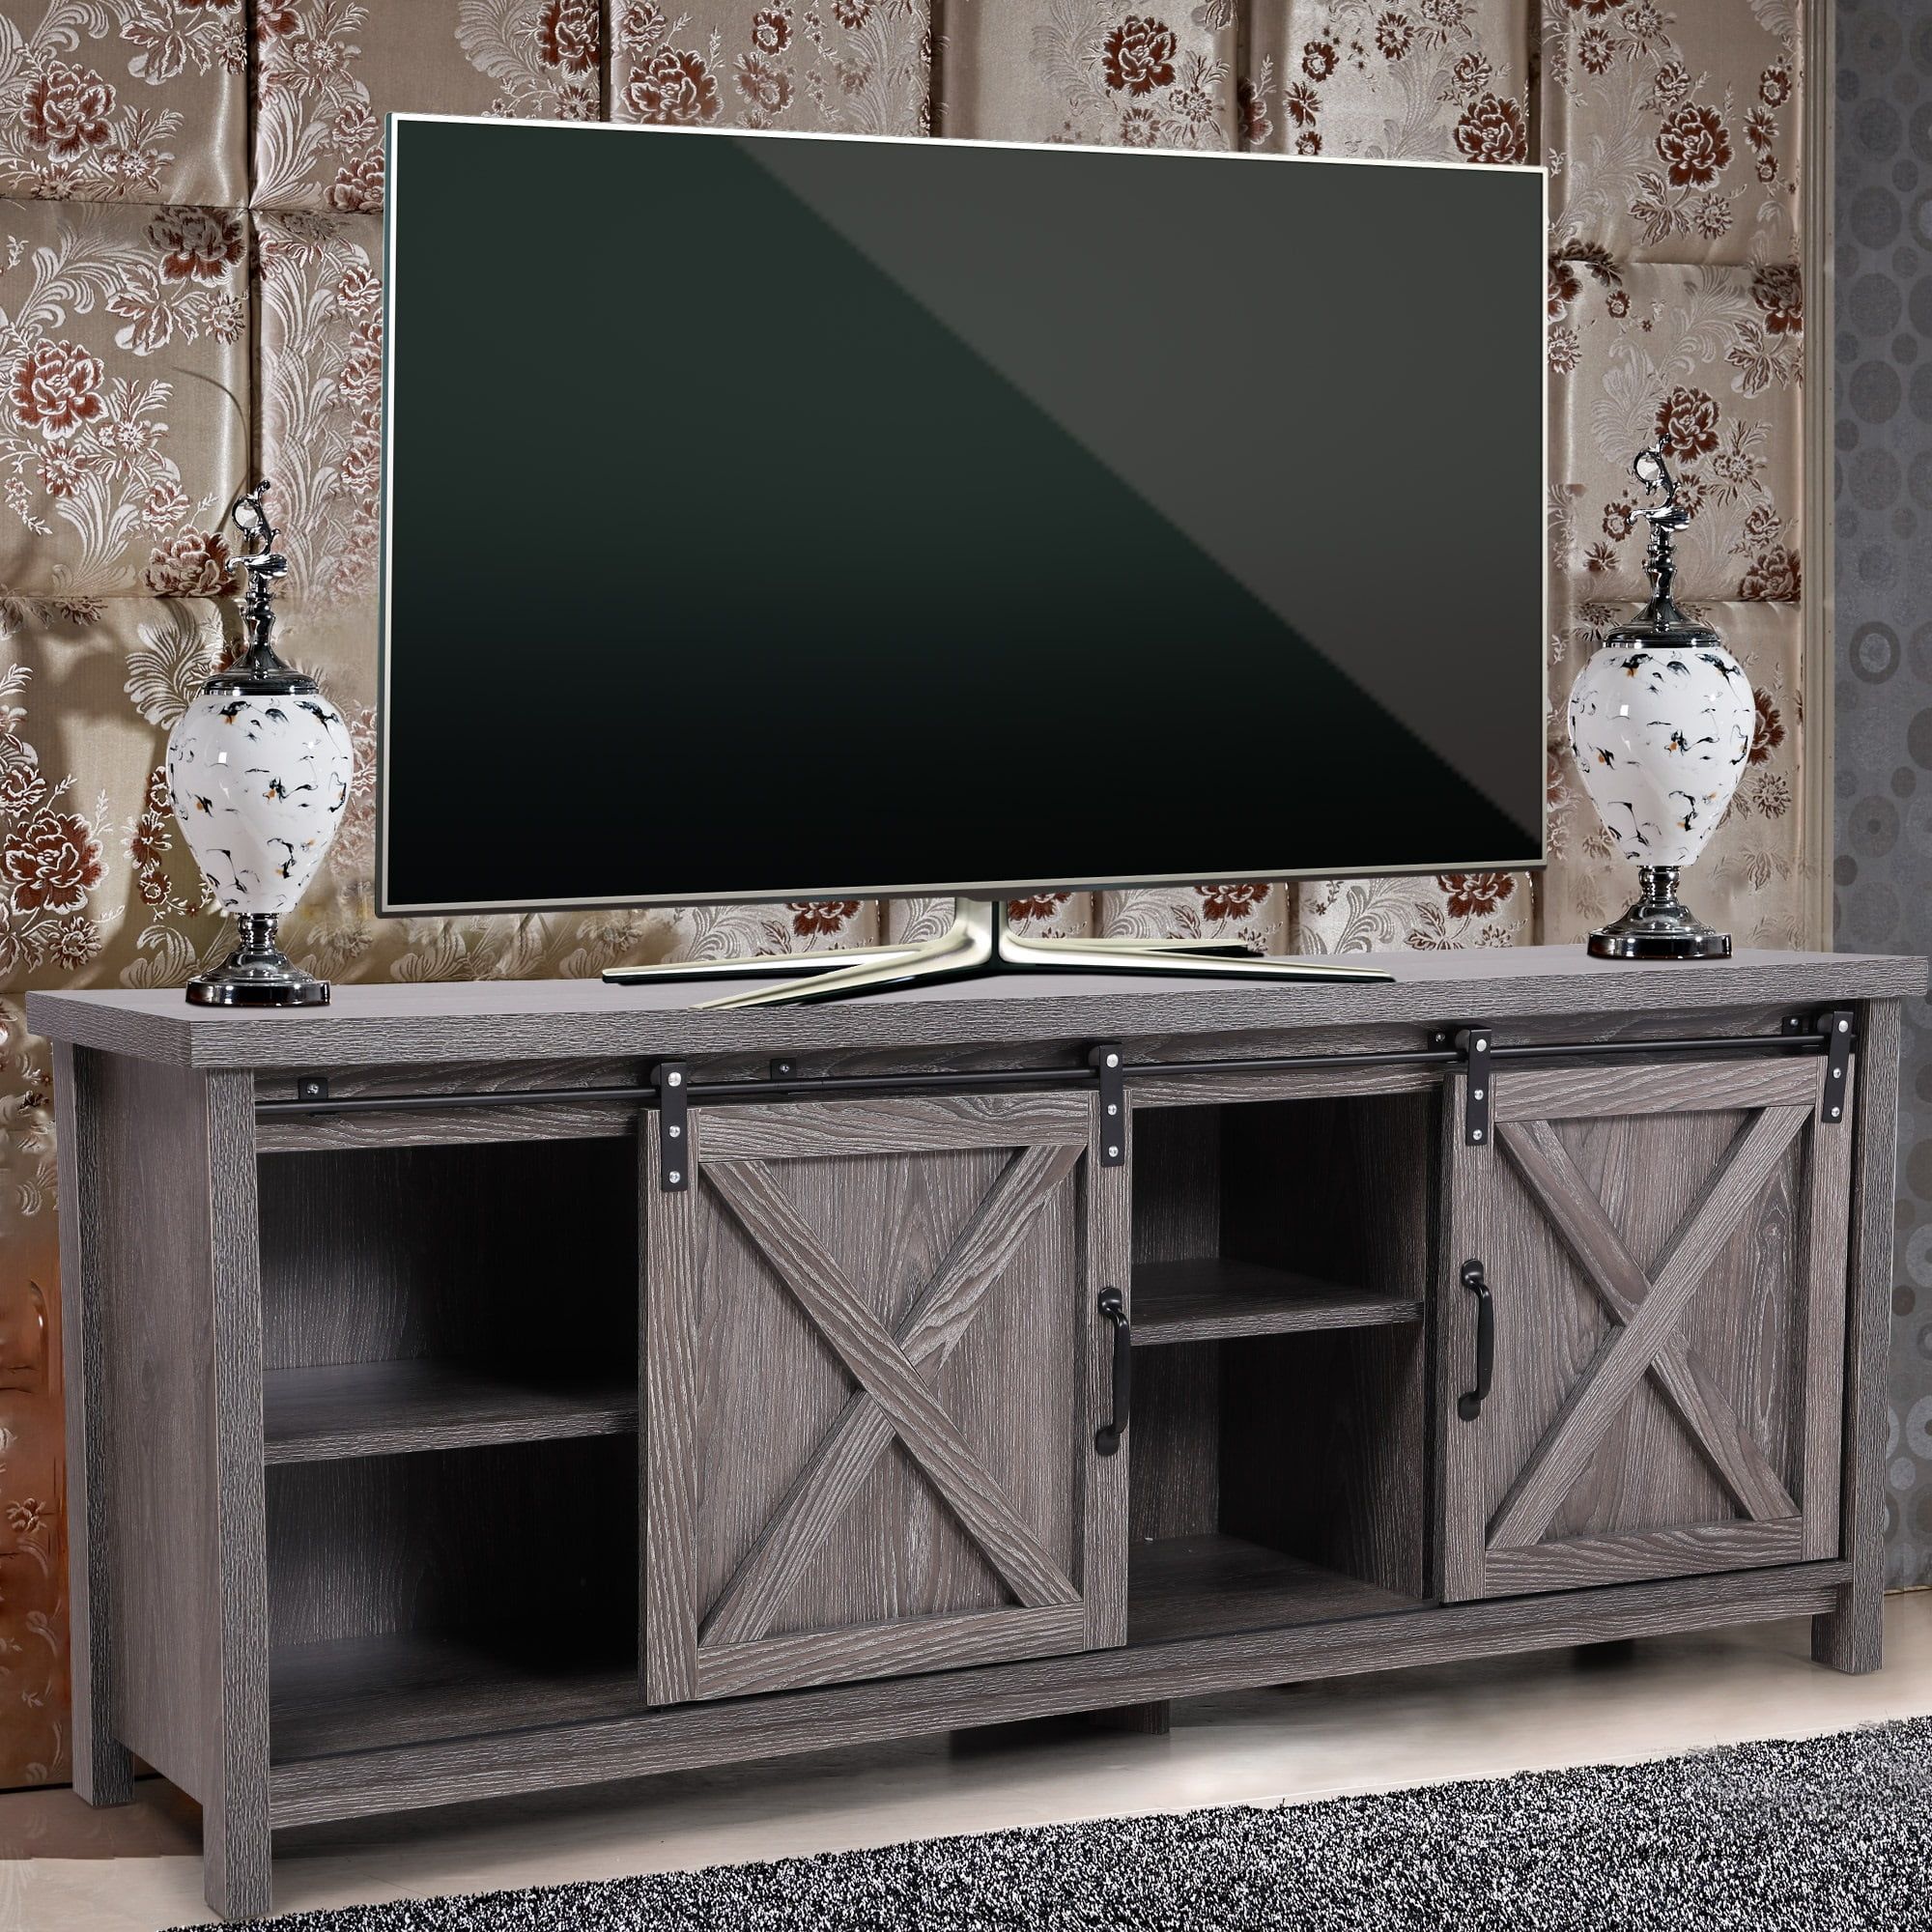 Jaxpety 58" Farmhouse Sliding Barn Door Tv Stand For Tvs Up To 65 For Entertainment Center With Storage Cabinet (View 6 of 20)